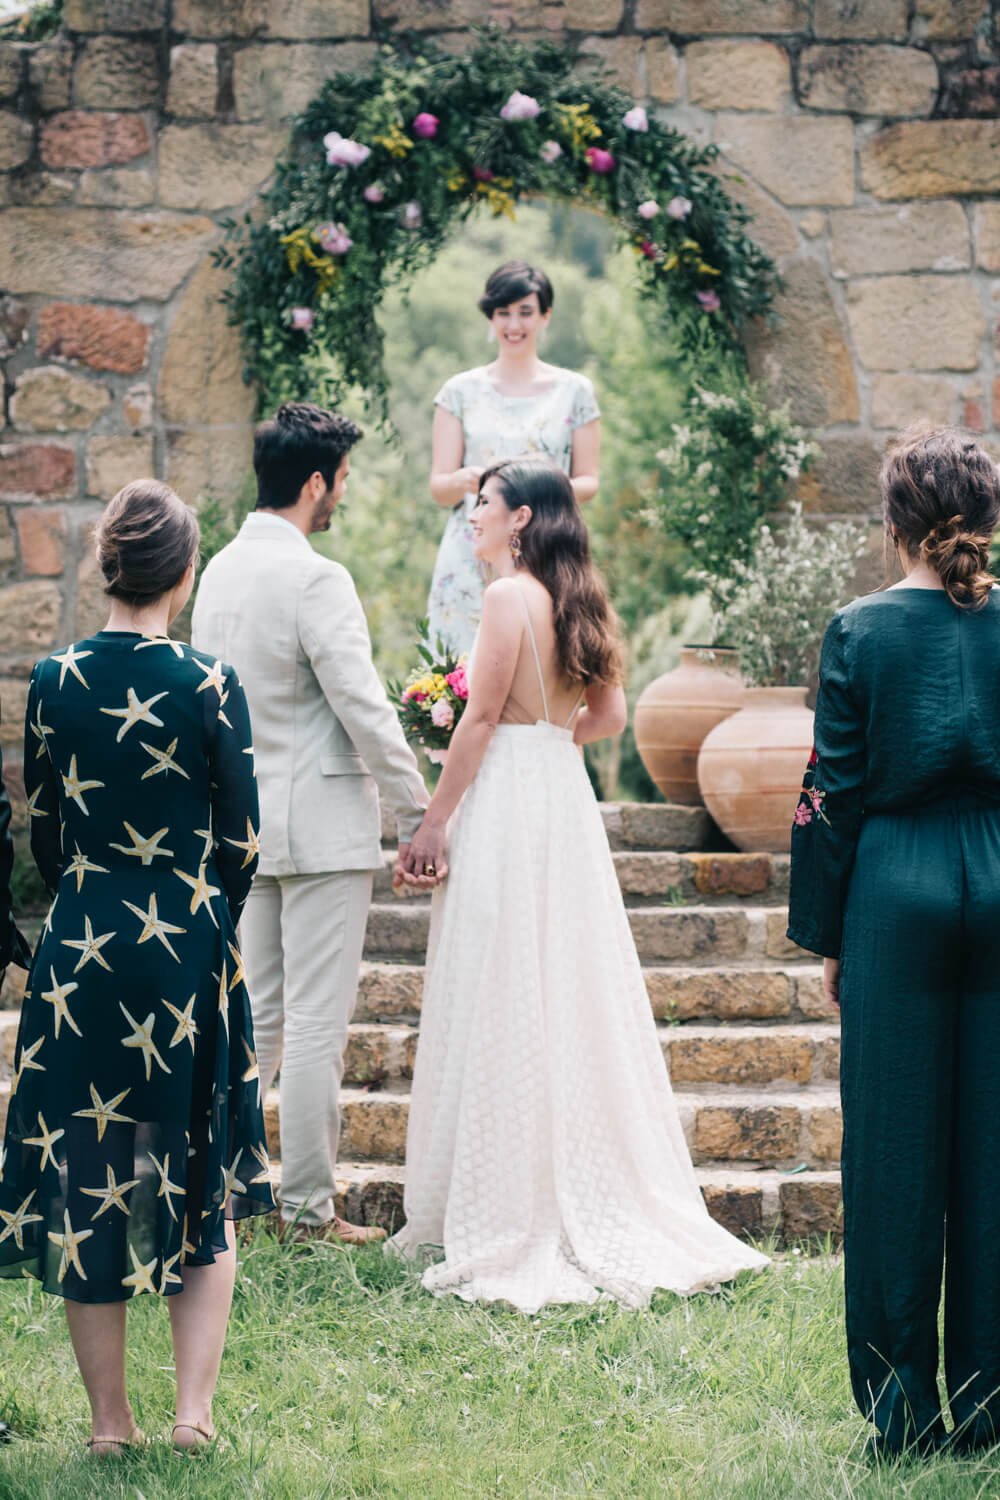 Intimate European Destination Weddings in Spain's Basque Country photographed by European Destination Wedding Photographers, Ugo Photography